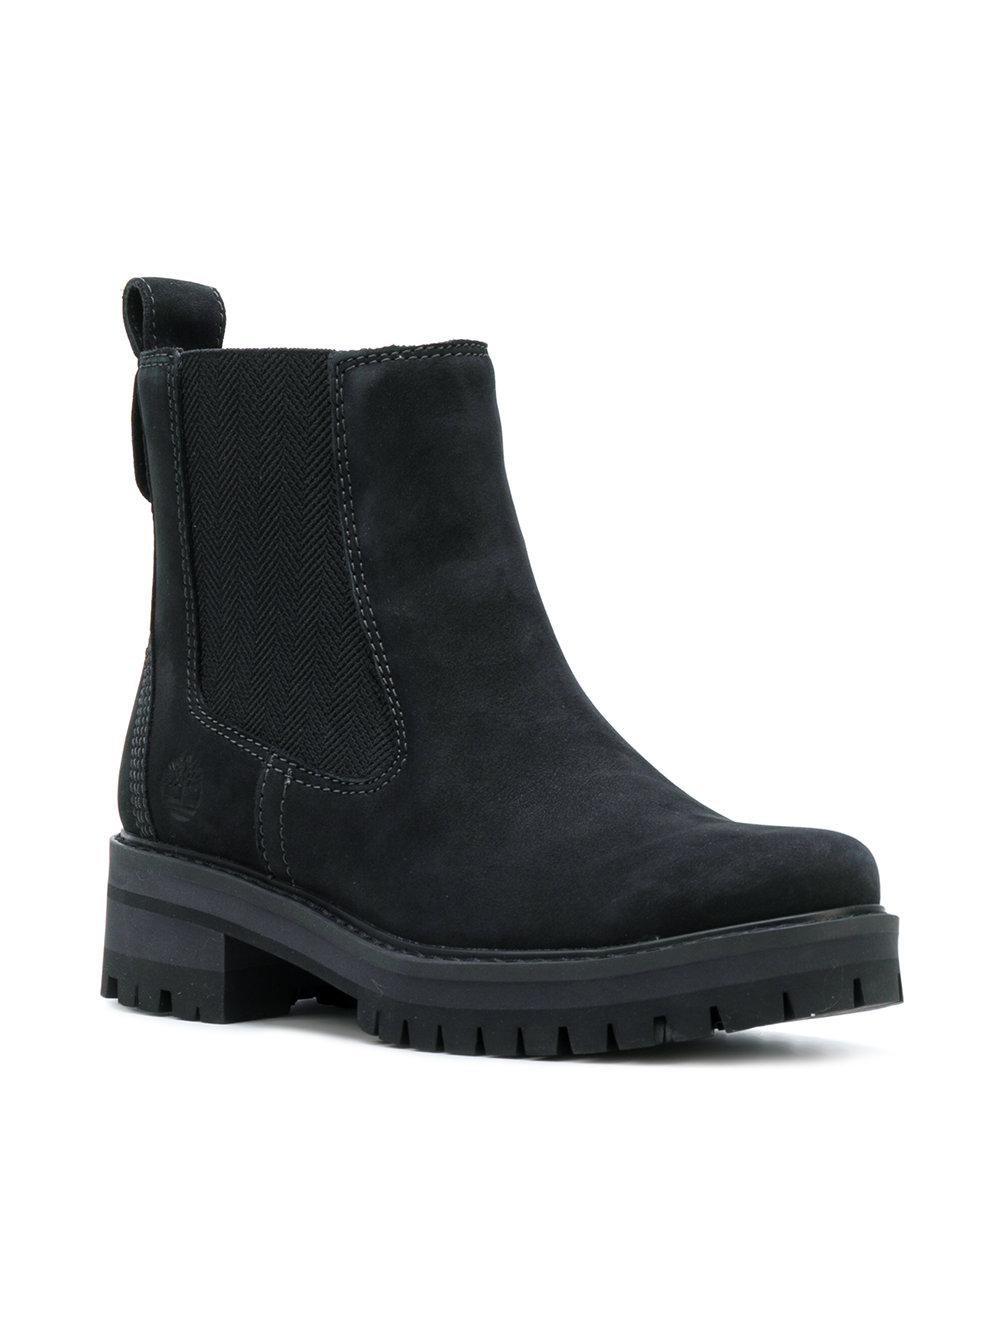 Lyst - Timberland Ridged Ankle Boots in Black